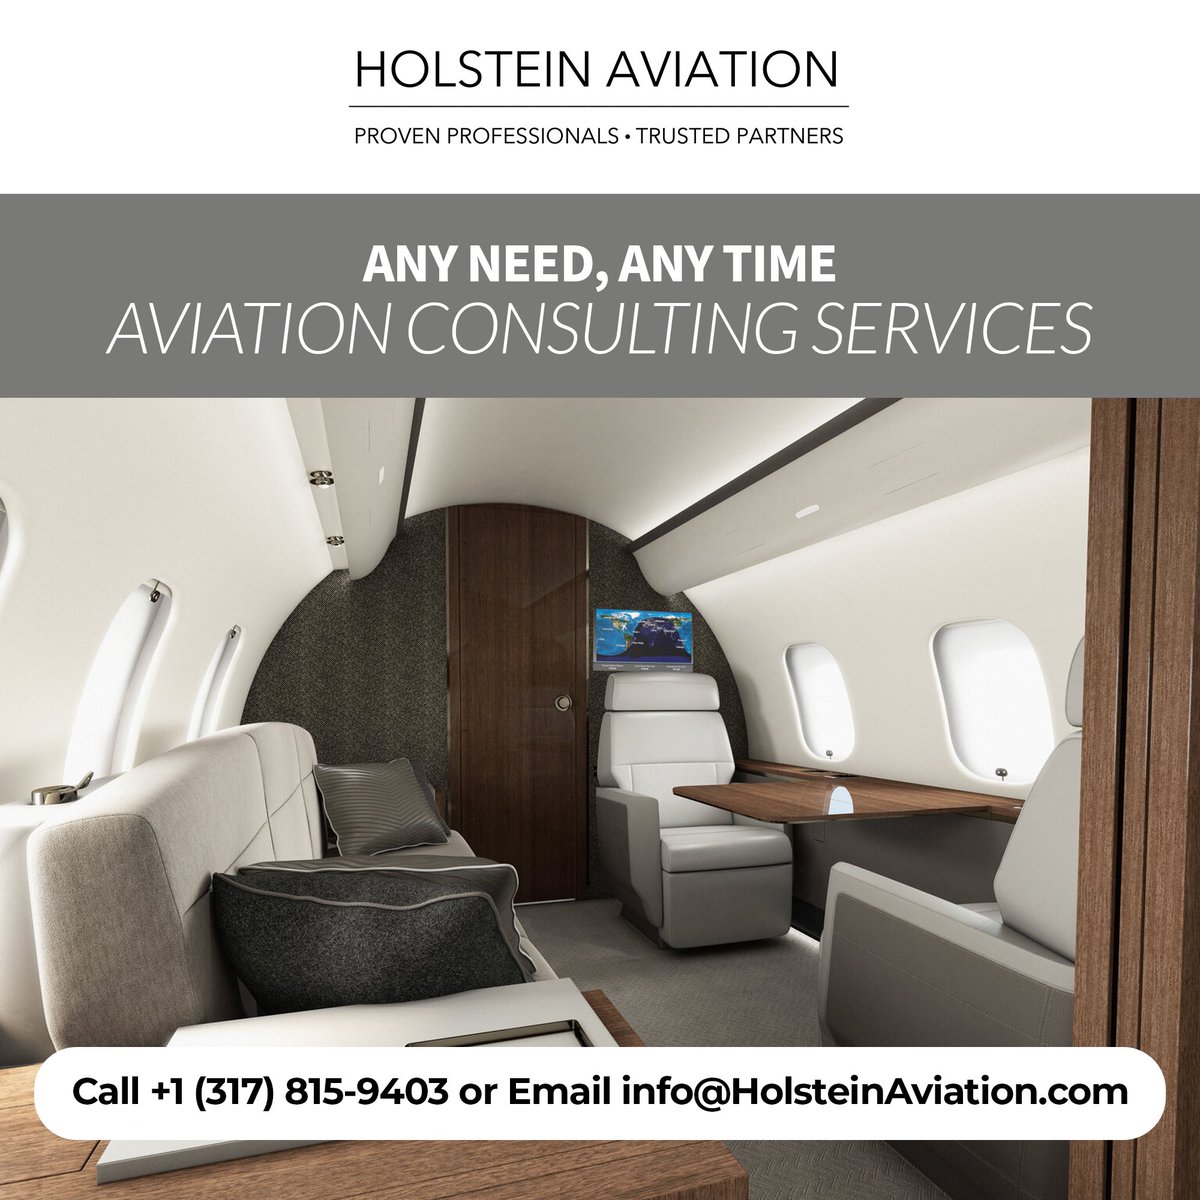 There is never a cost for getting to know us. Call us at +1 (317) 815-9403 or Email Info@HolsteinAviation.com to talk with a proven professional. Learn more at HolsteinAviation.com

#aviation #aircraft #businessjet #aircraftbroker #aeroclassifieds #highend #wealth #business